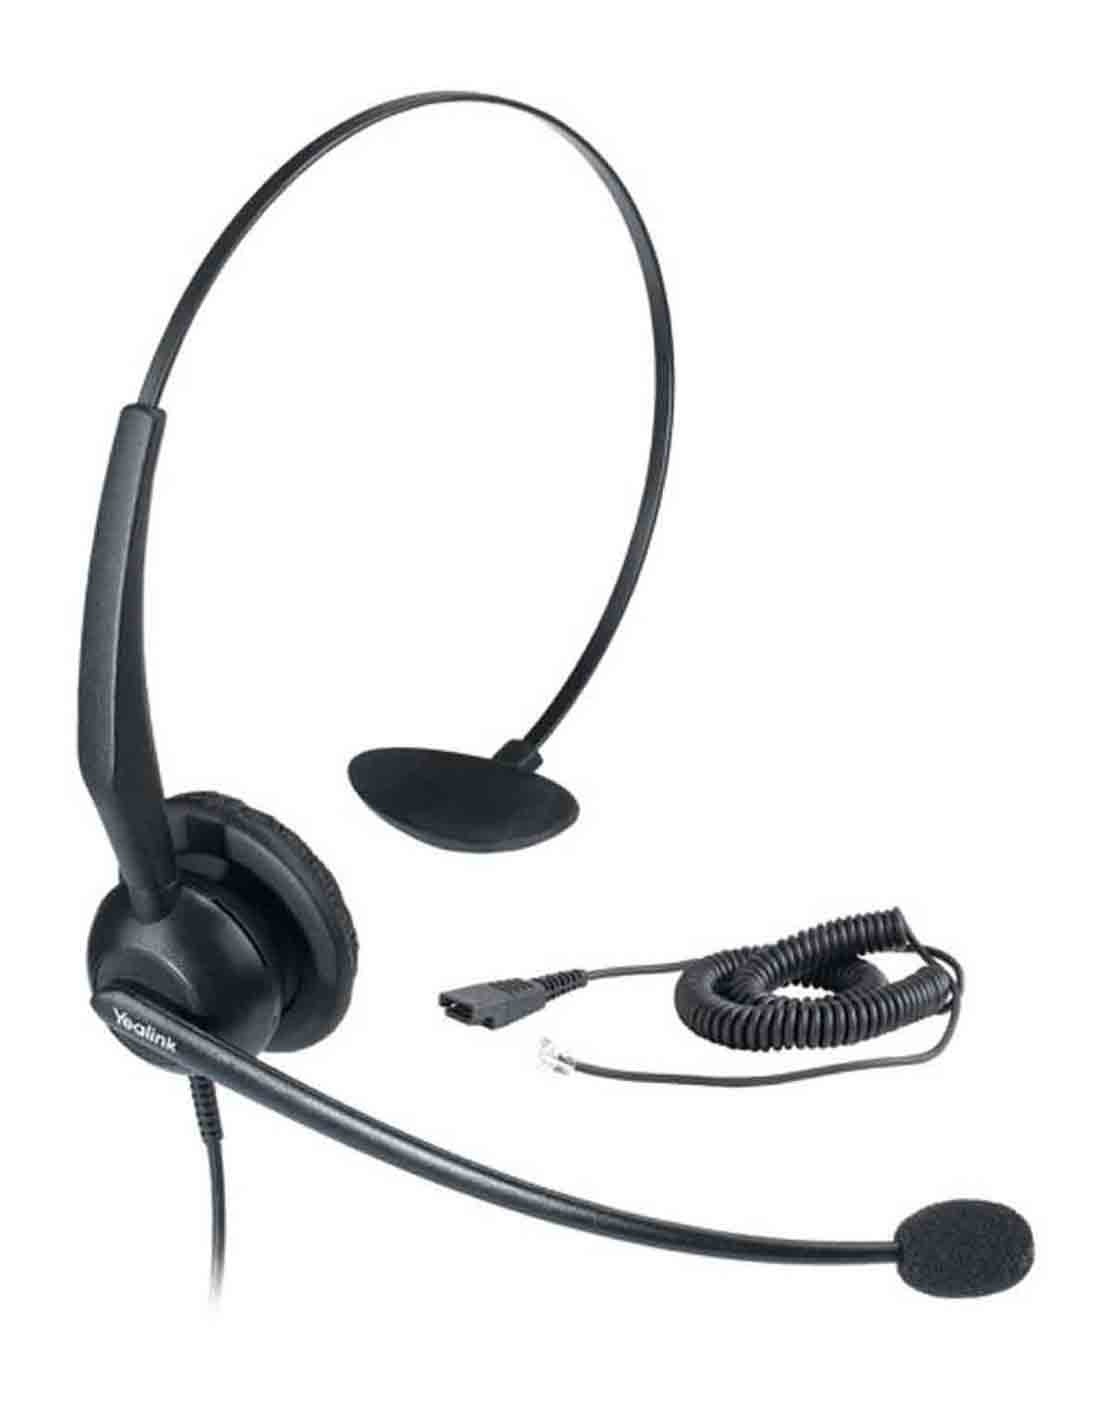 Yealink YHS32 Professional Call Center Headset at a Cheap Price in Dubai Online Store